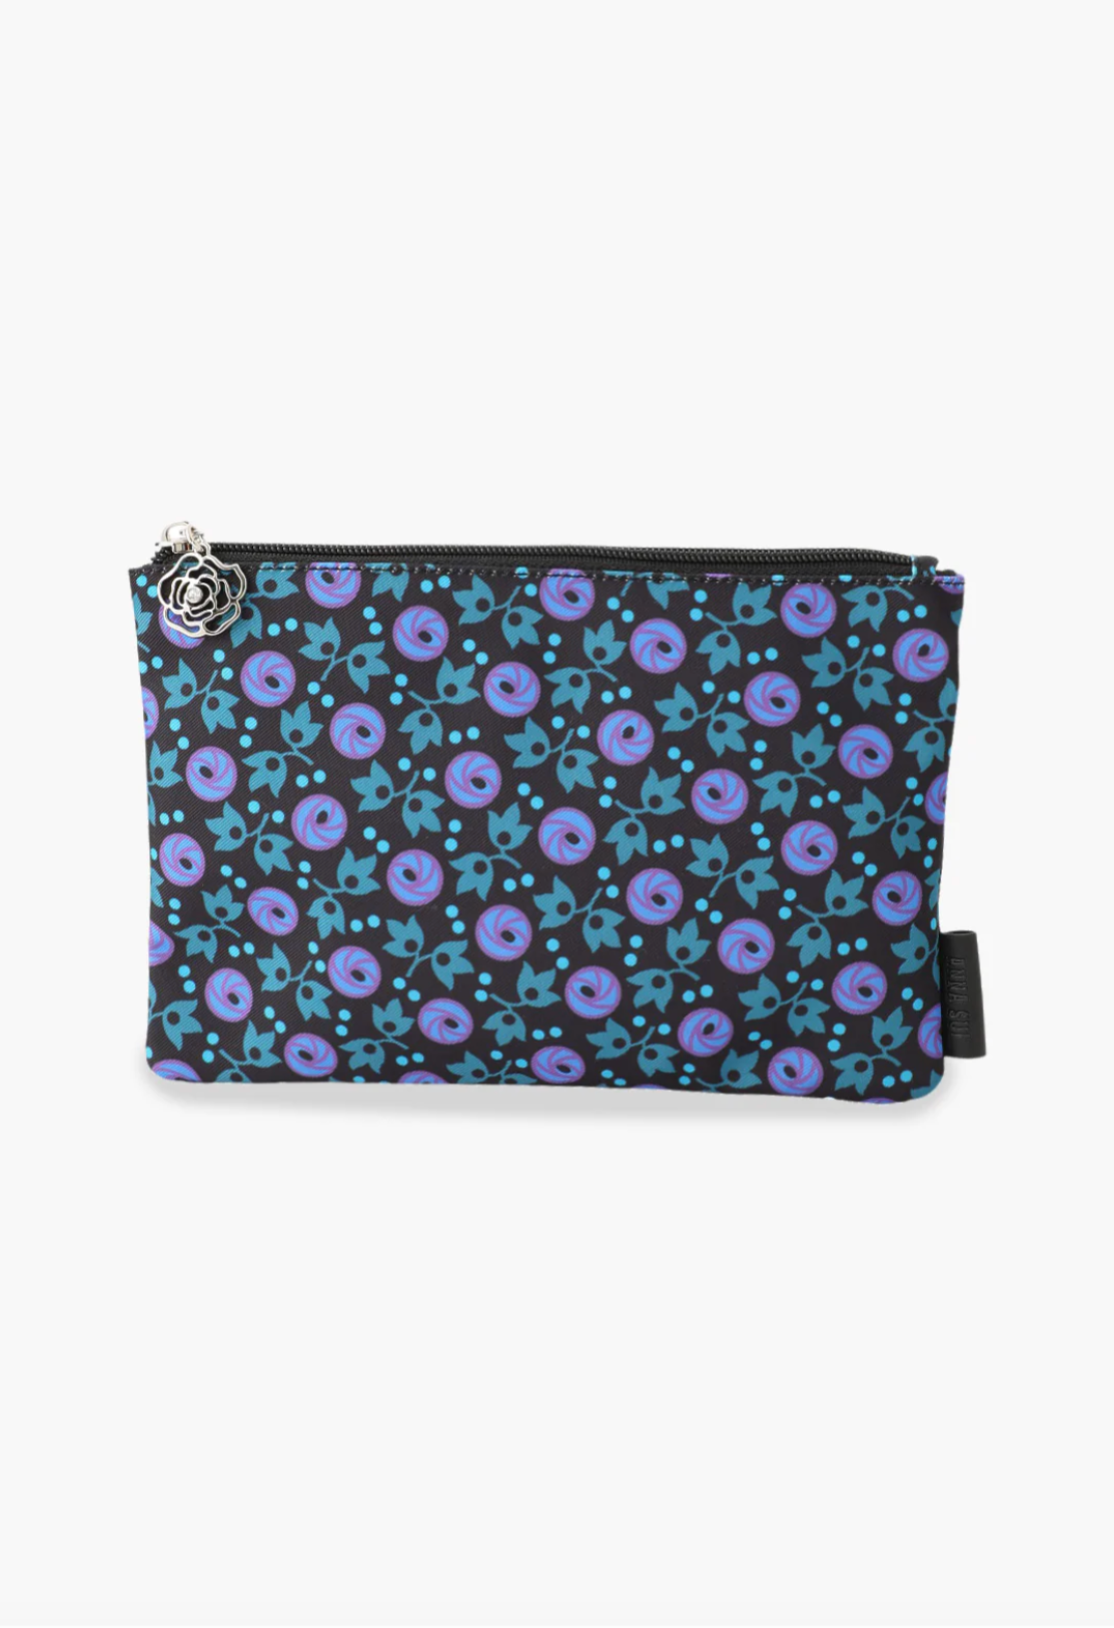 A pouch bag like with floral blueish design, zipper rose with a gemstone pull tab